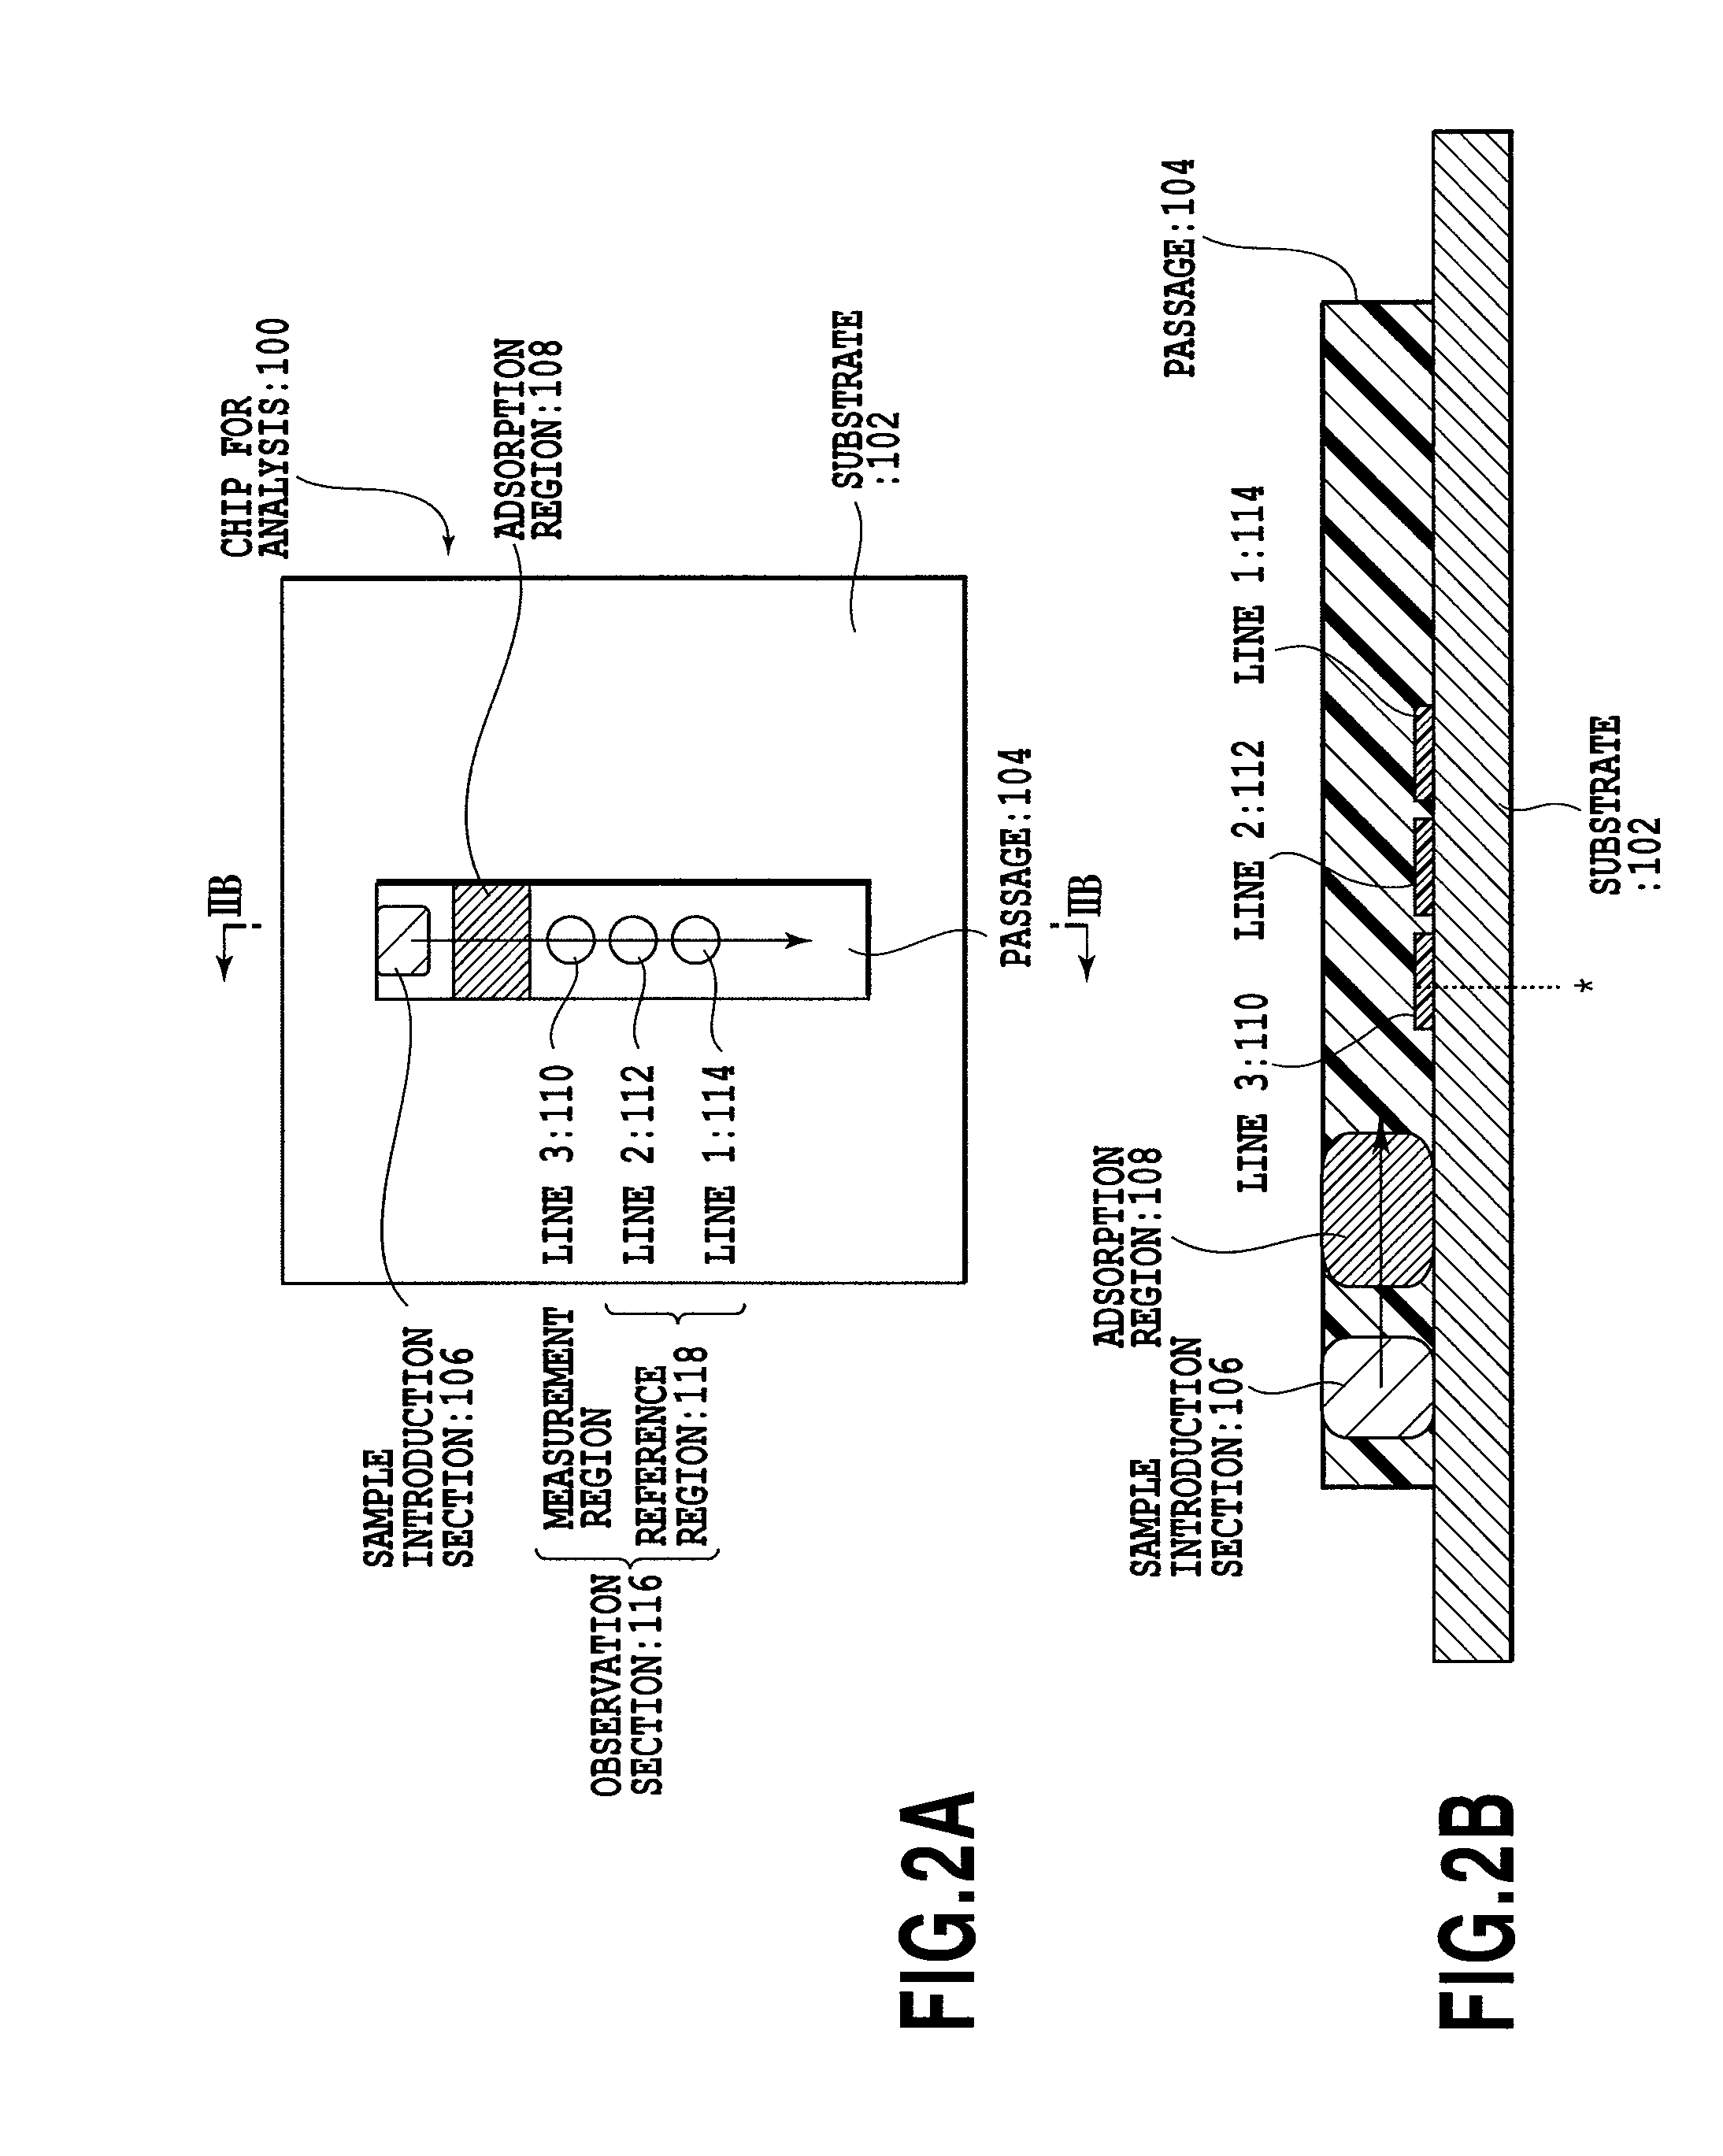 Chip for optical analysis